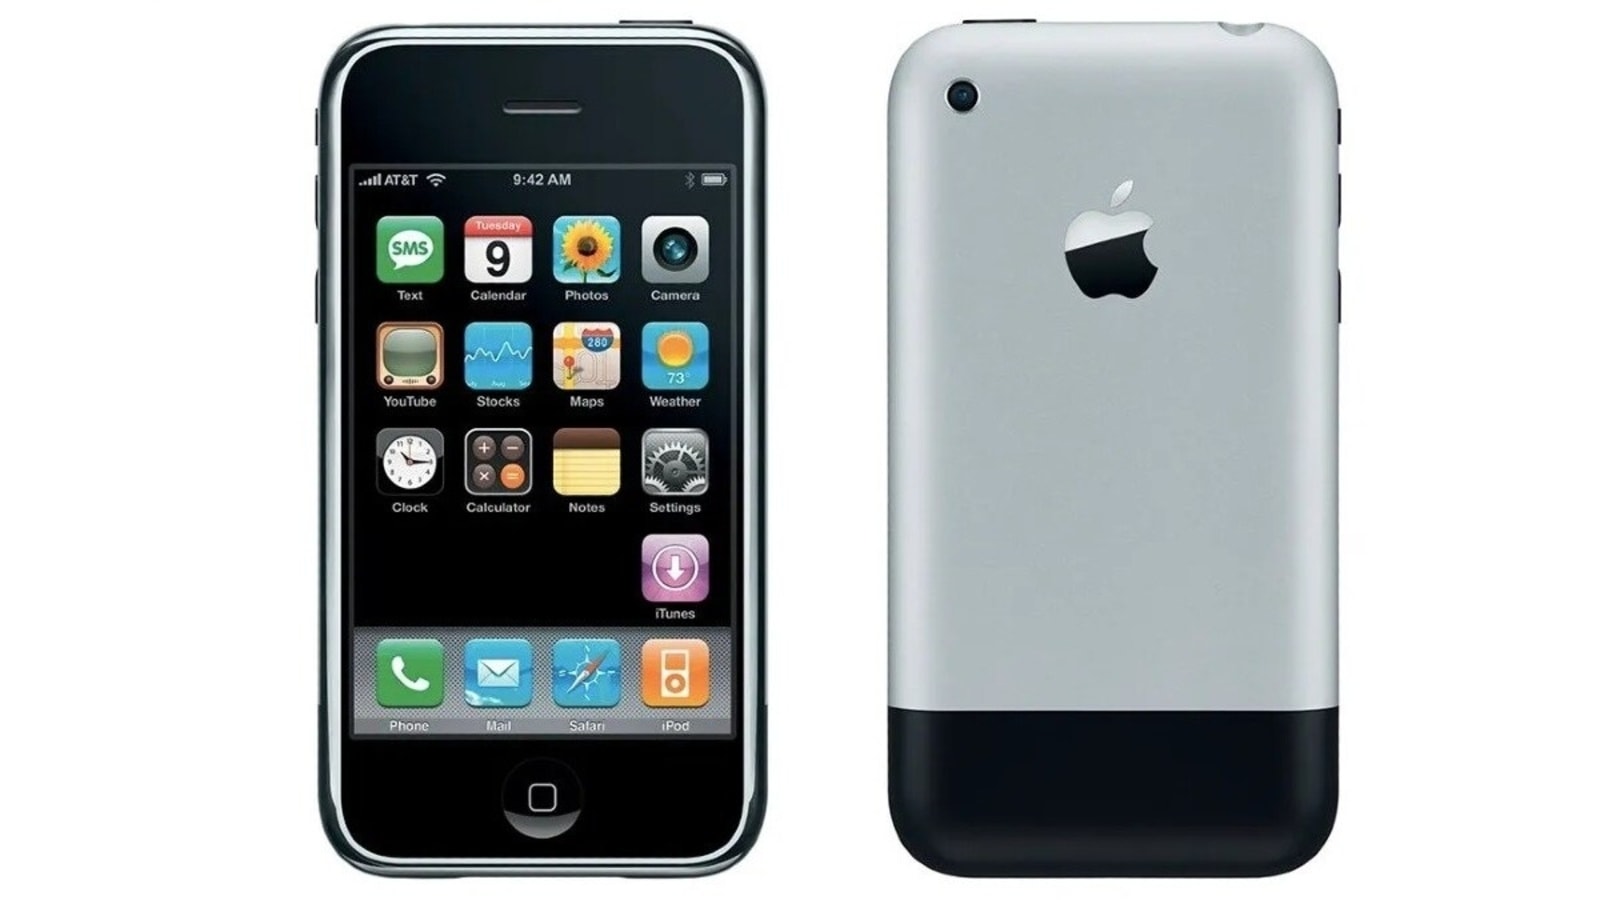 iPhone 1 — A 'revolutionary' smartphone that debuted at the 2007